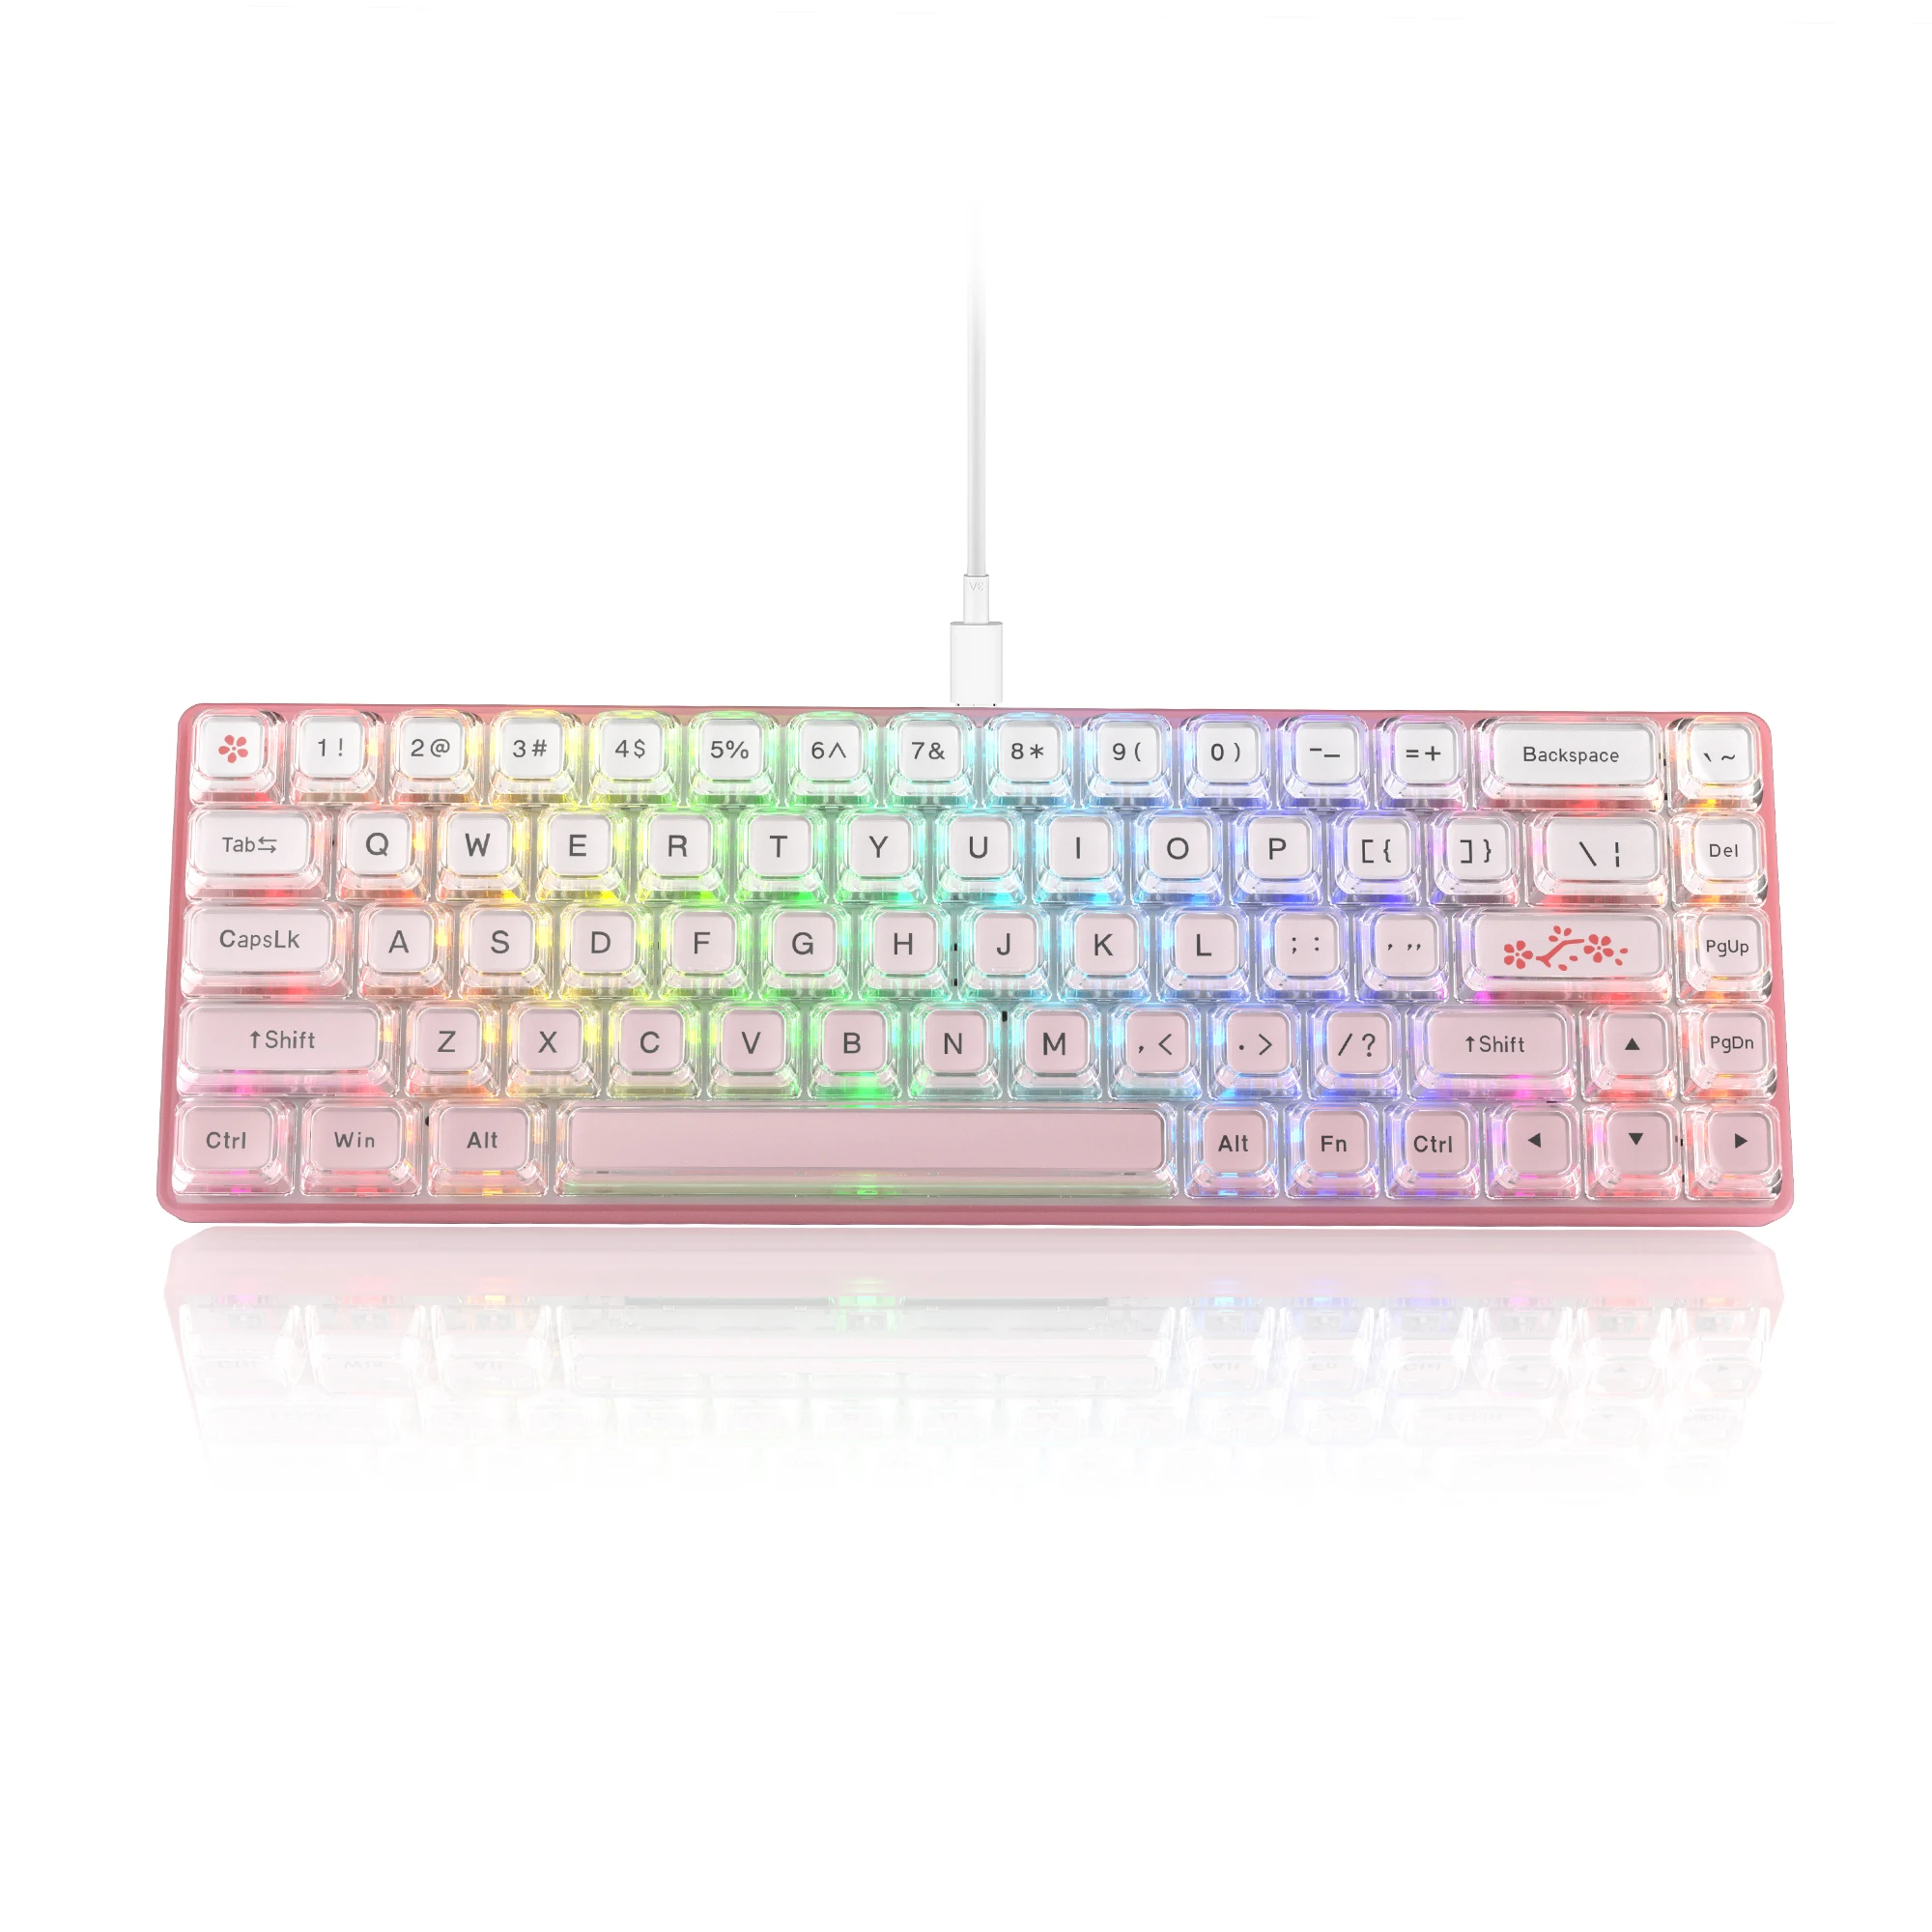 

Womier WK68 60% Keyboard Hot-Swappable Pink Keyboard RGB Wire Gaming Mechanical Keyboard Pudding PBT Keycap Red Switch